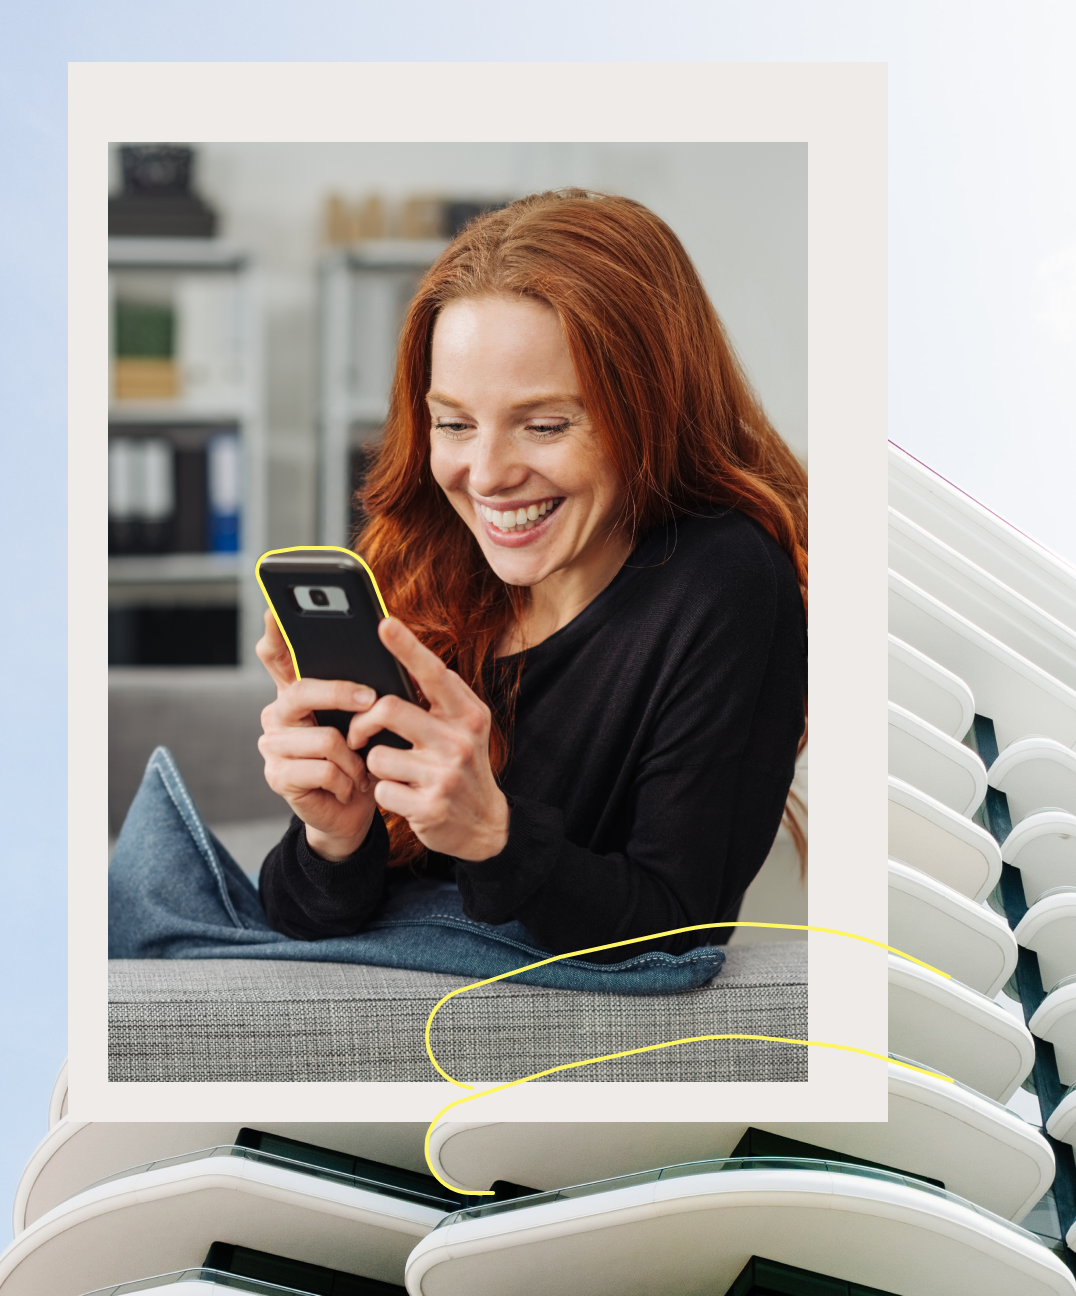 Laughing woman with smartphone in background real estate